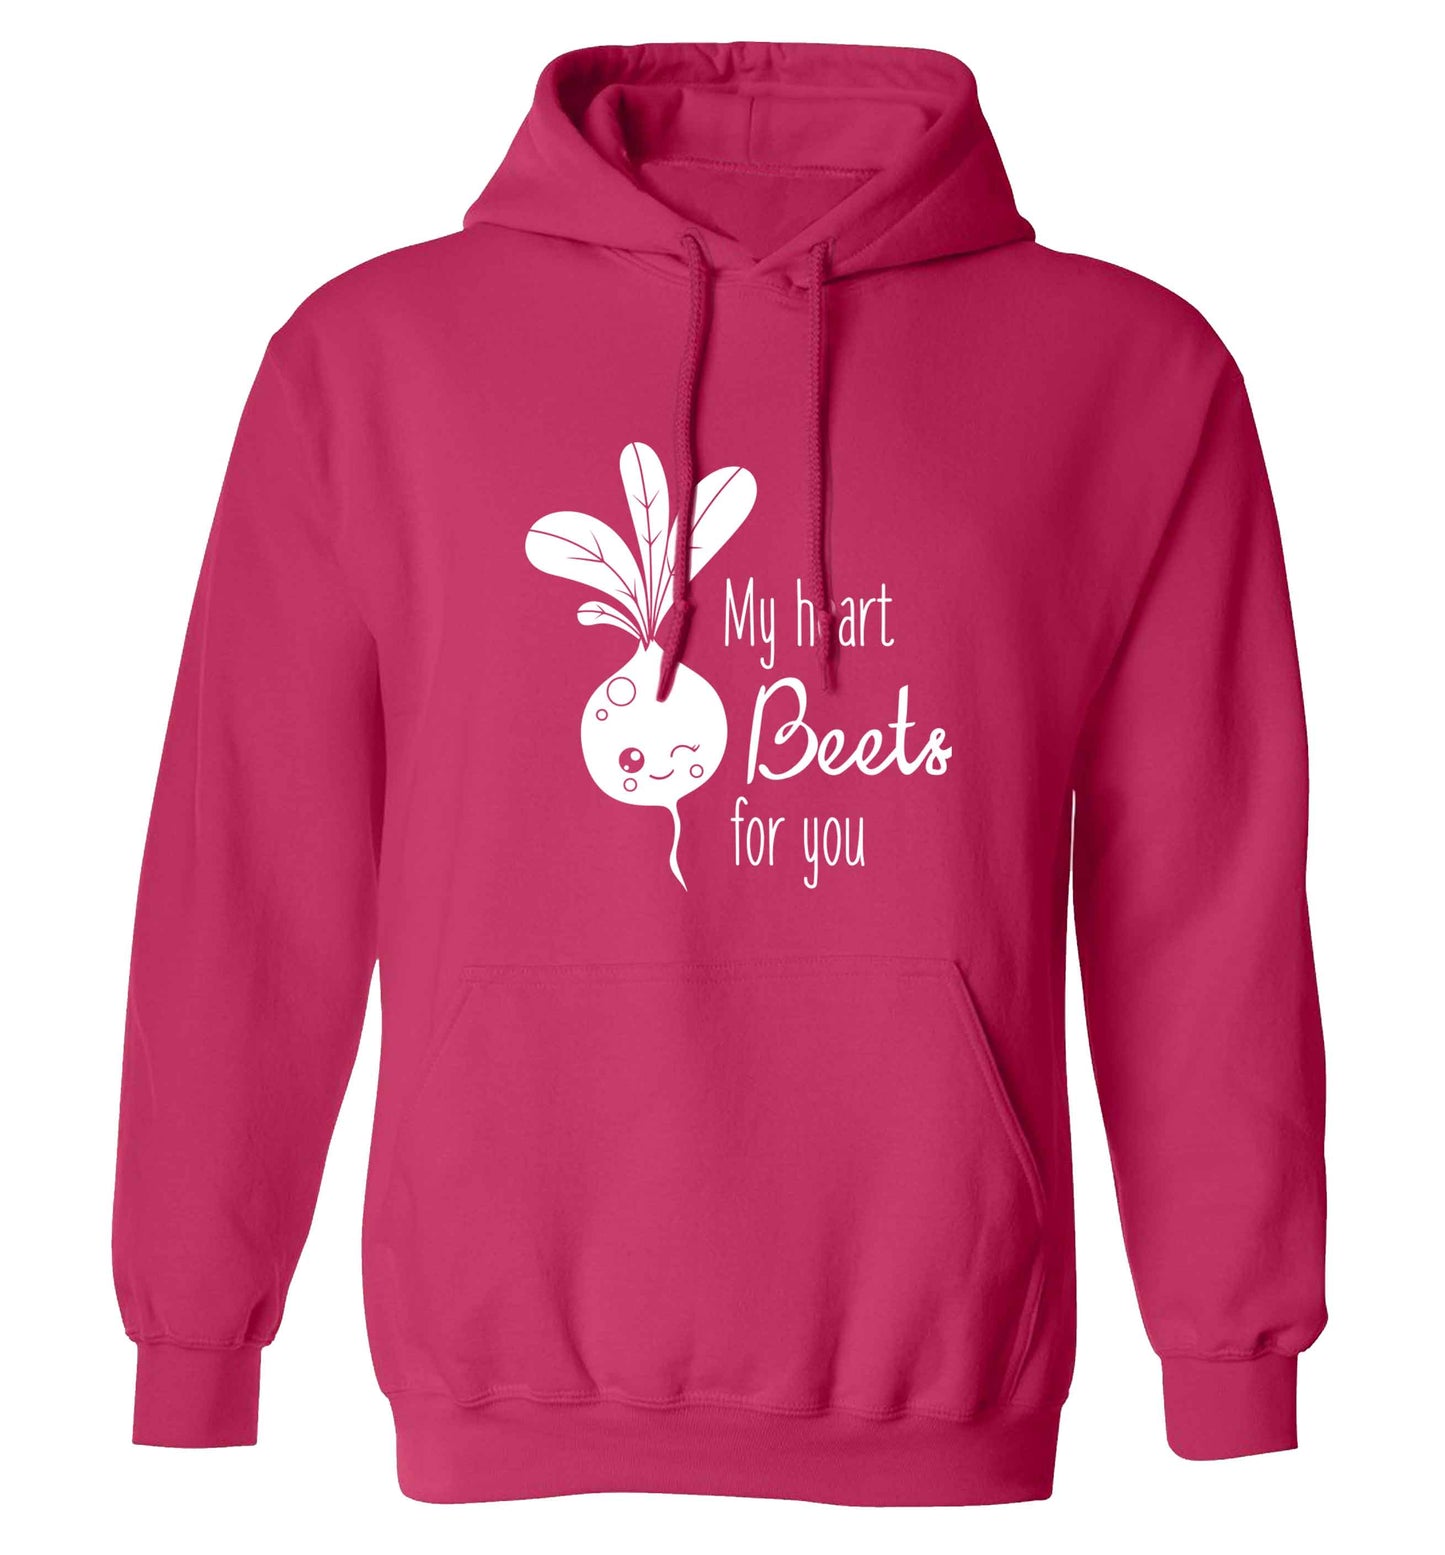 My heart beets for you adults unisex pink hoodie 2XL